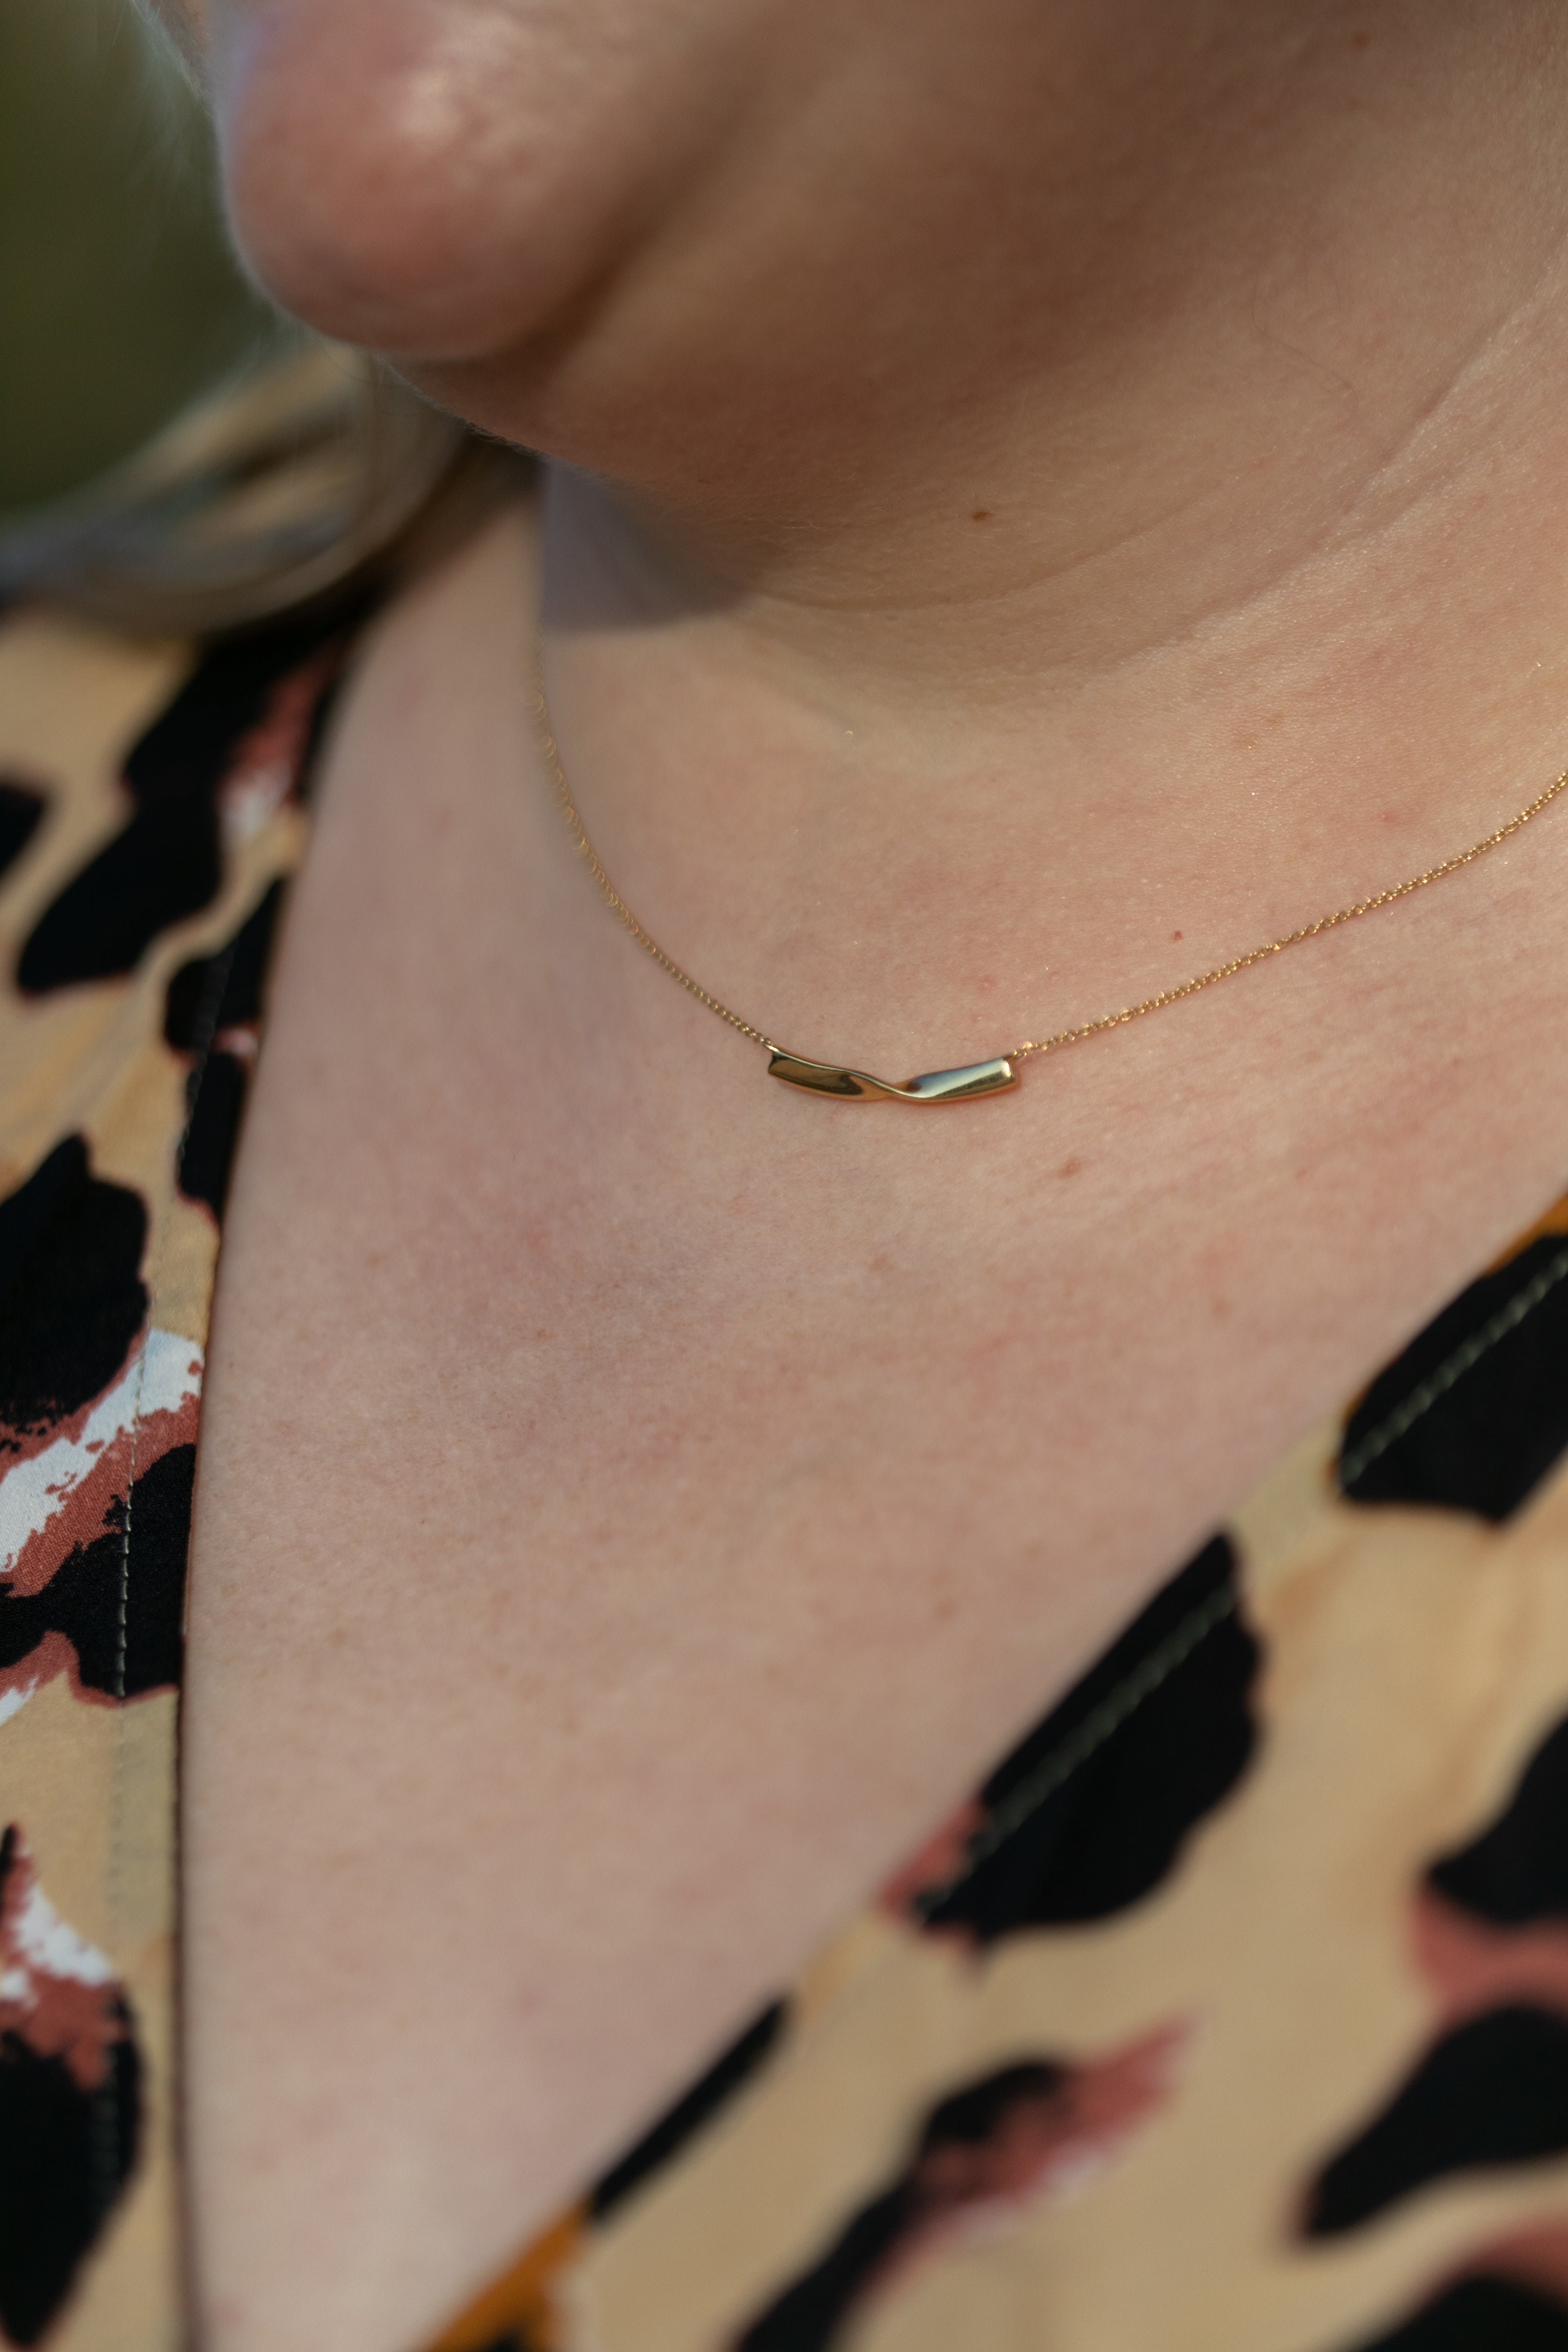 a close up of a plus size woman's neck wearing a gold twist necklace